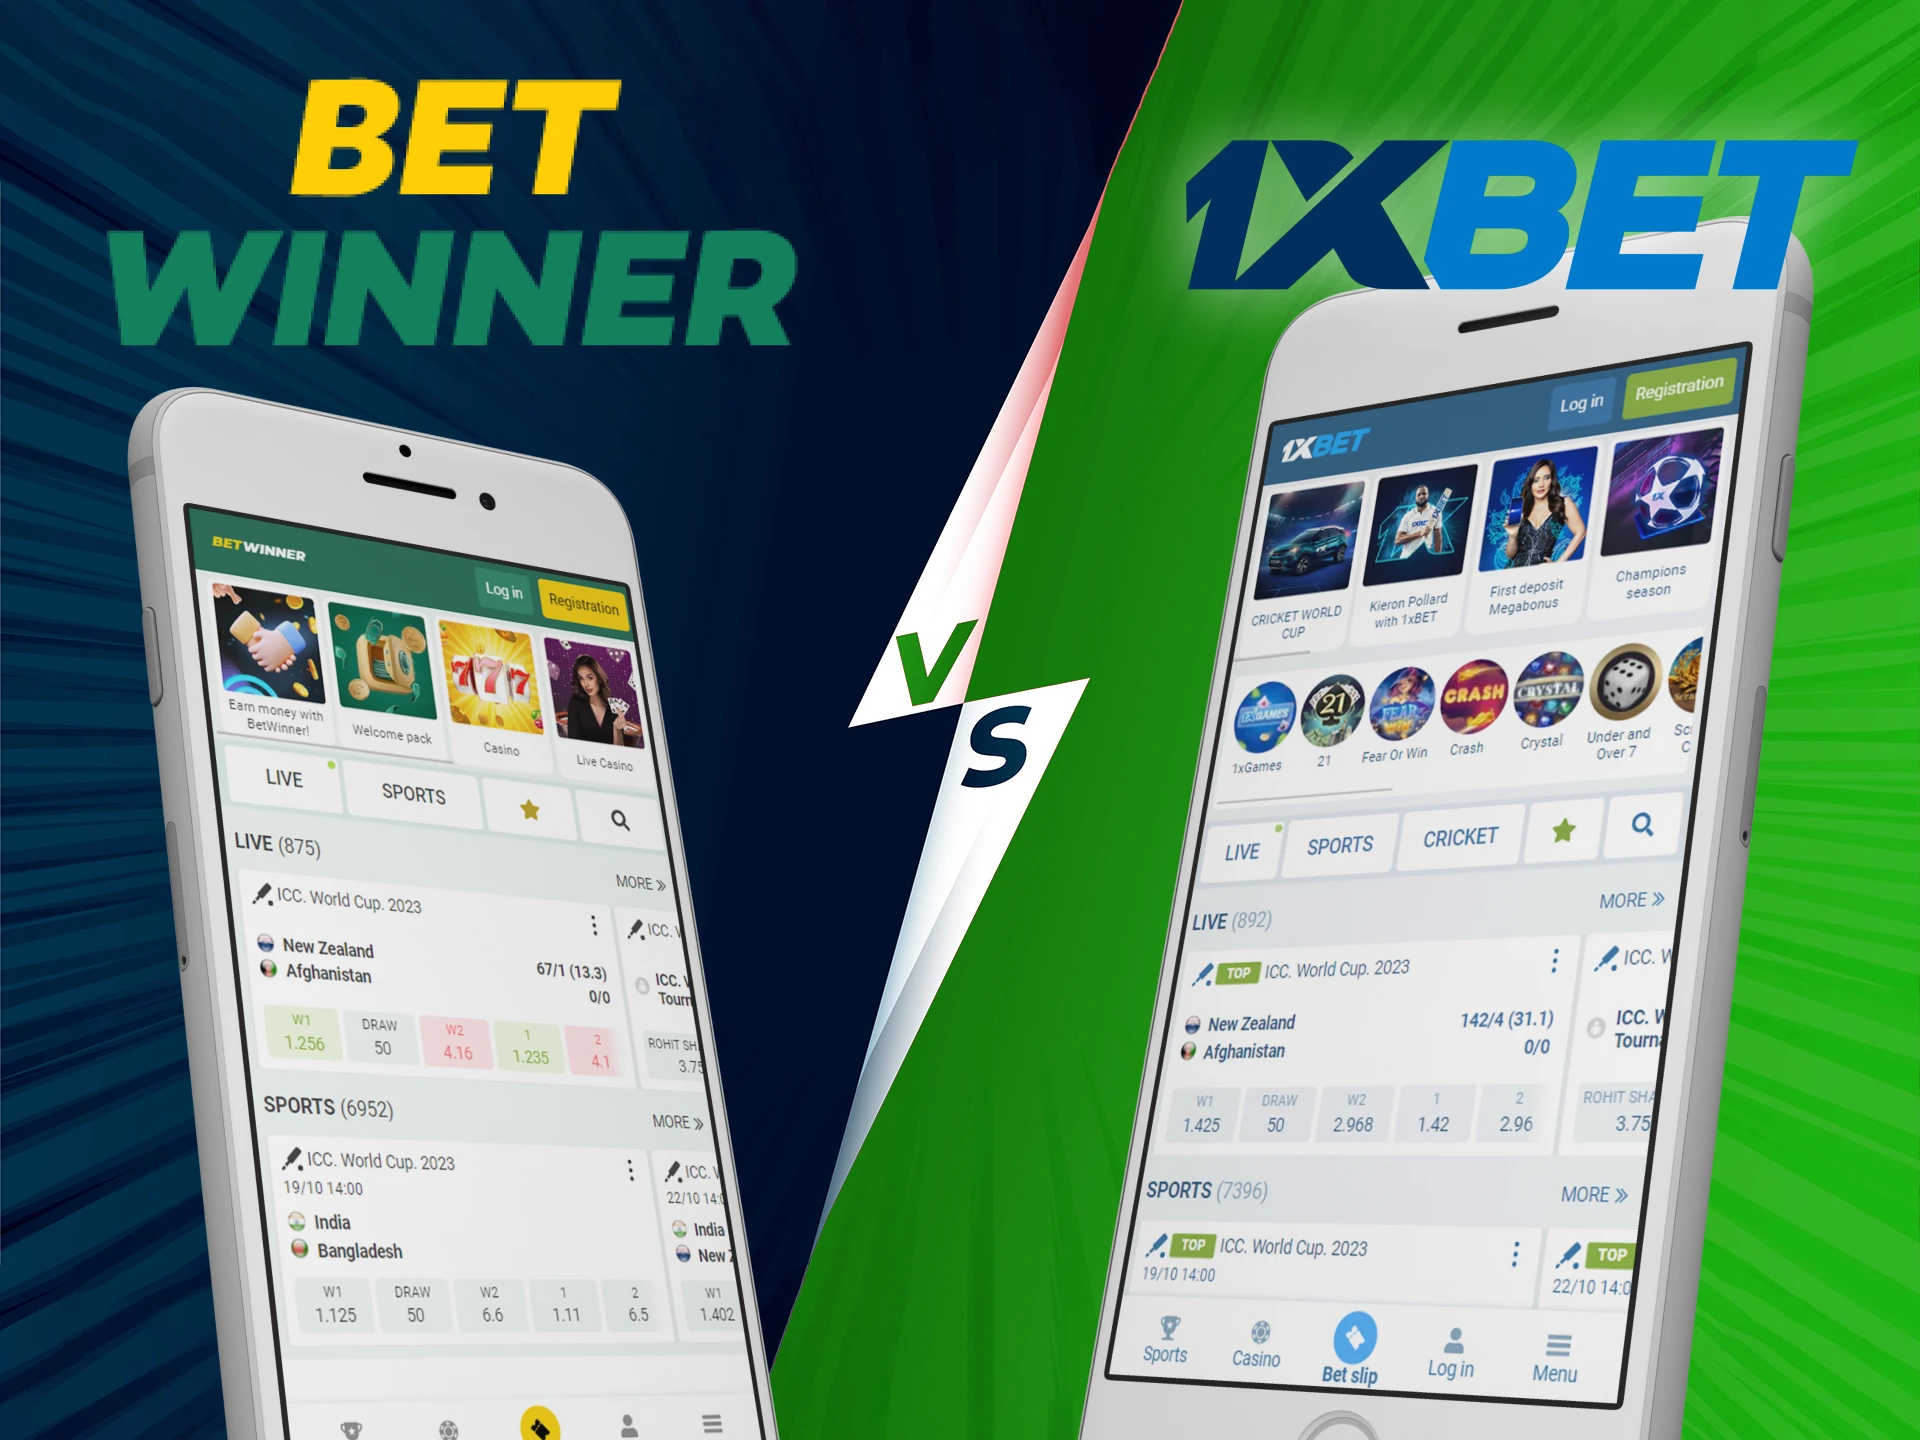 Compare the convenience of the 1xbet and Betwinner mobile applications.